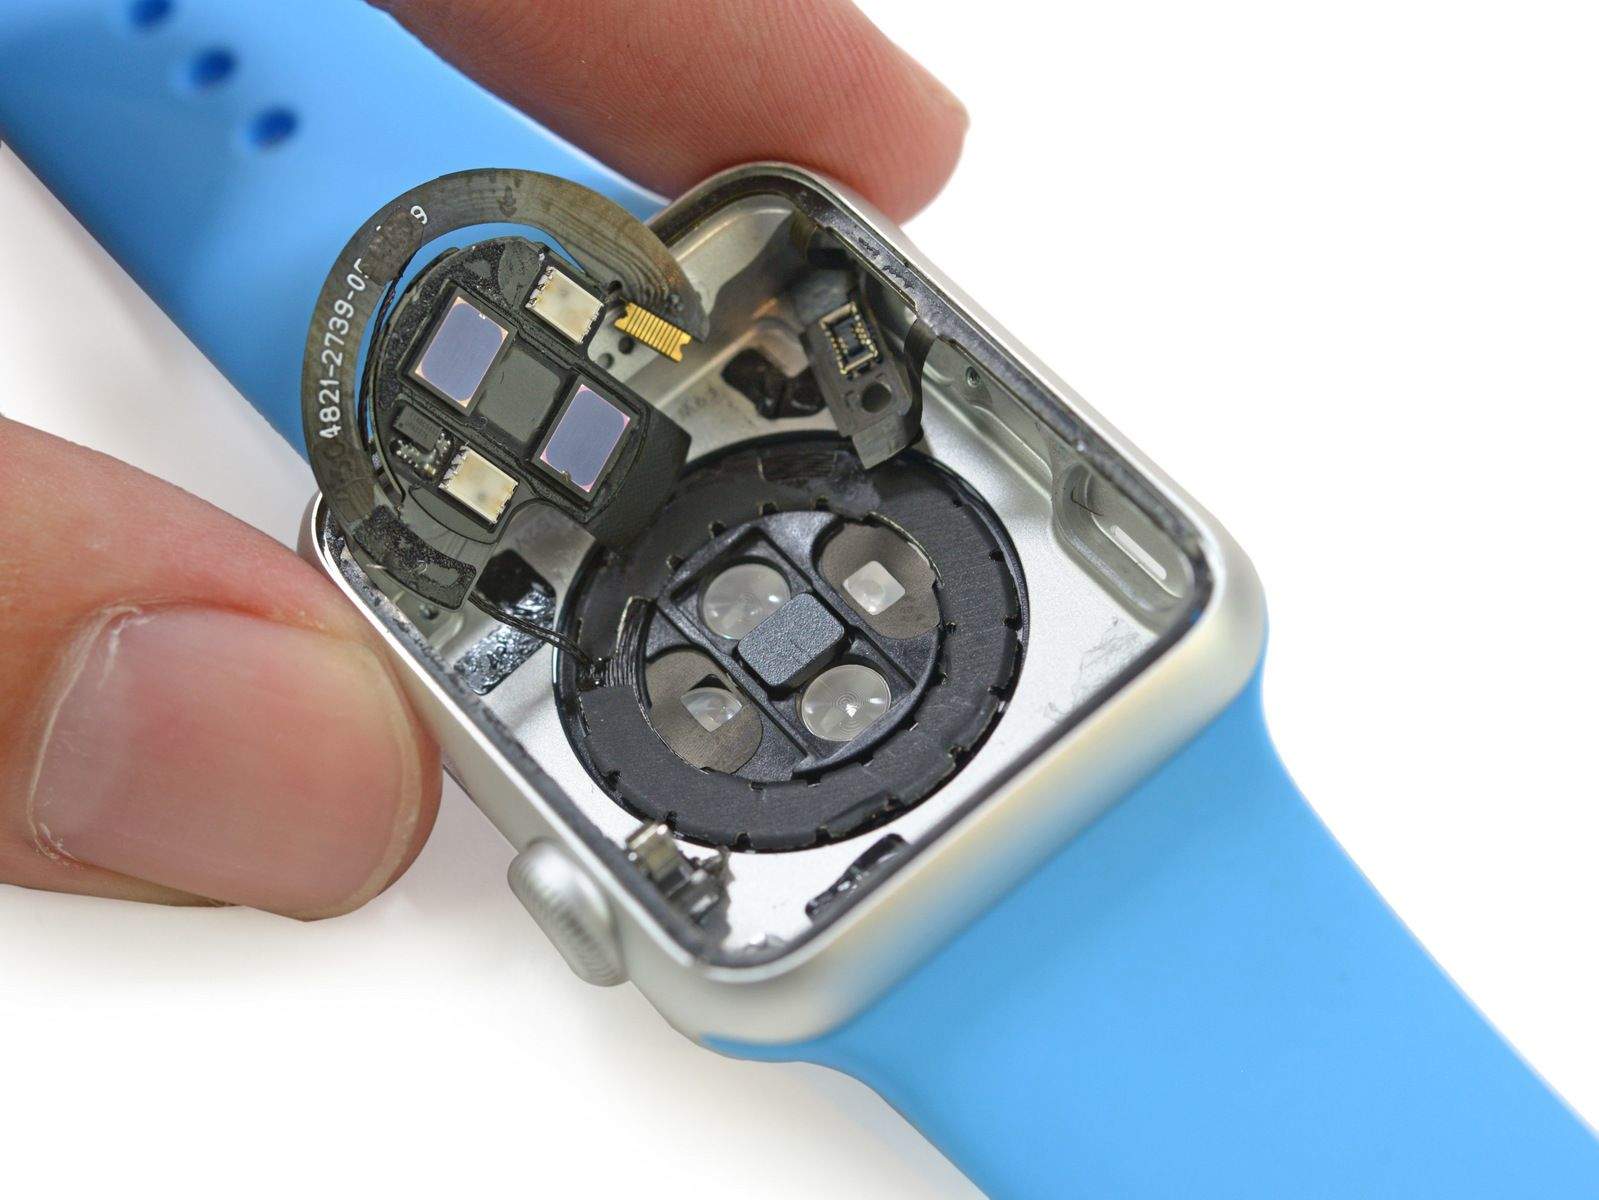 These sensors don't just measure heart rate. Photo: iFixit